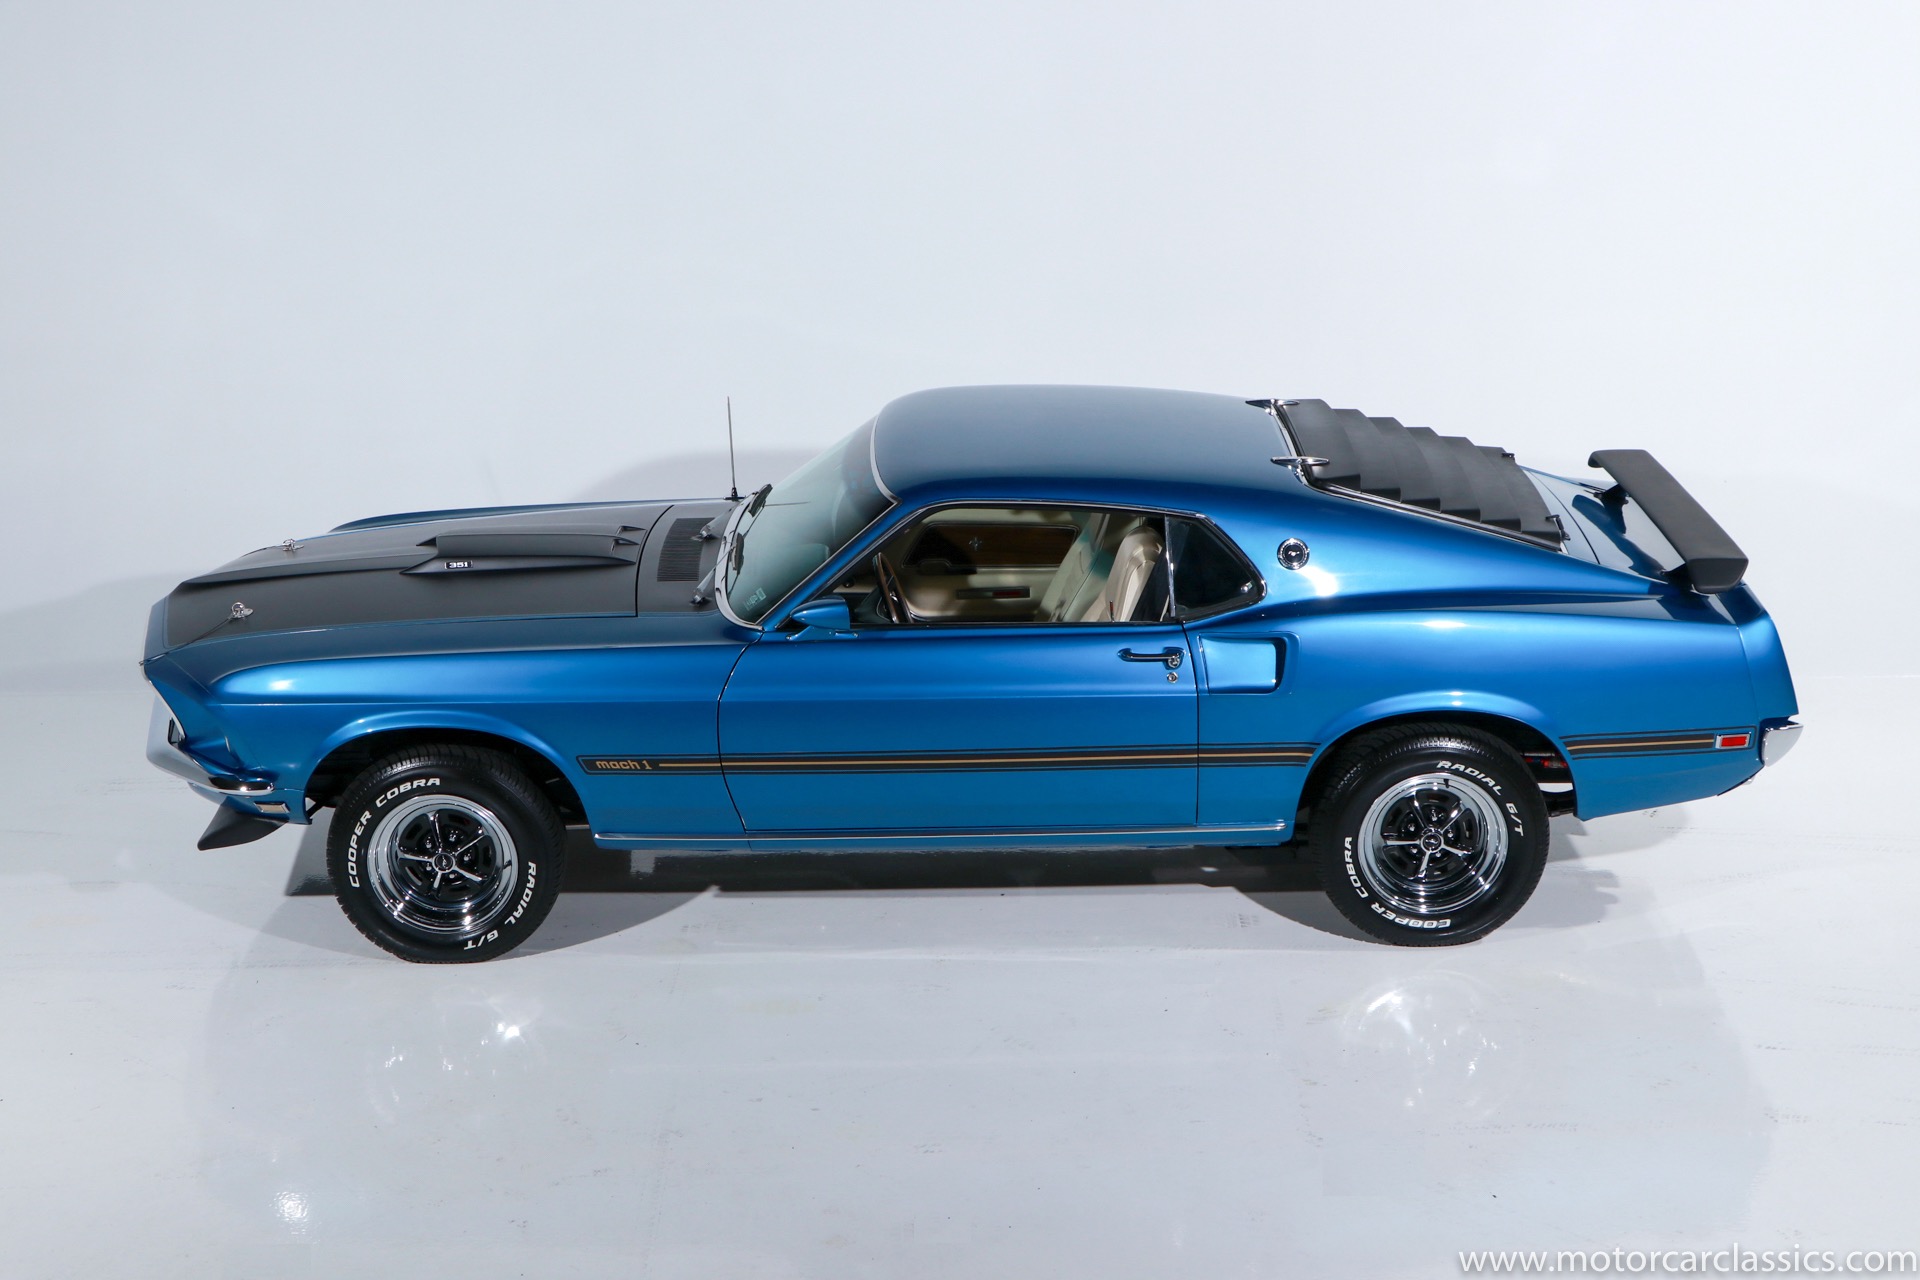 Used 1969 Ford Mustang Mach 1 For Sale ($89,900) | Motorcar Classics ...